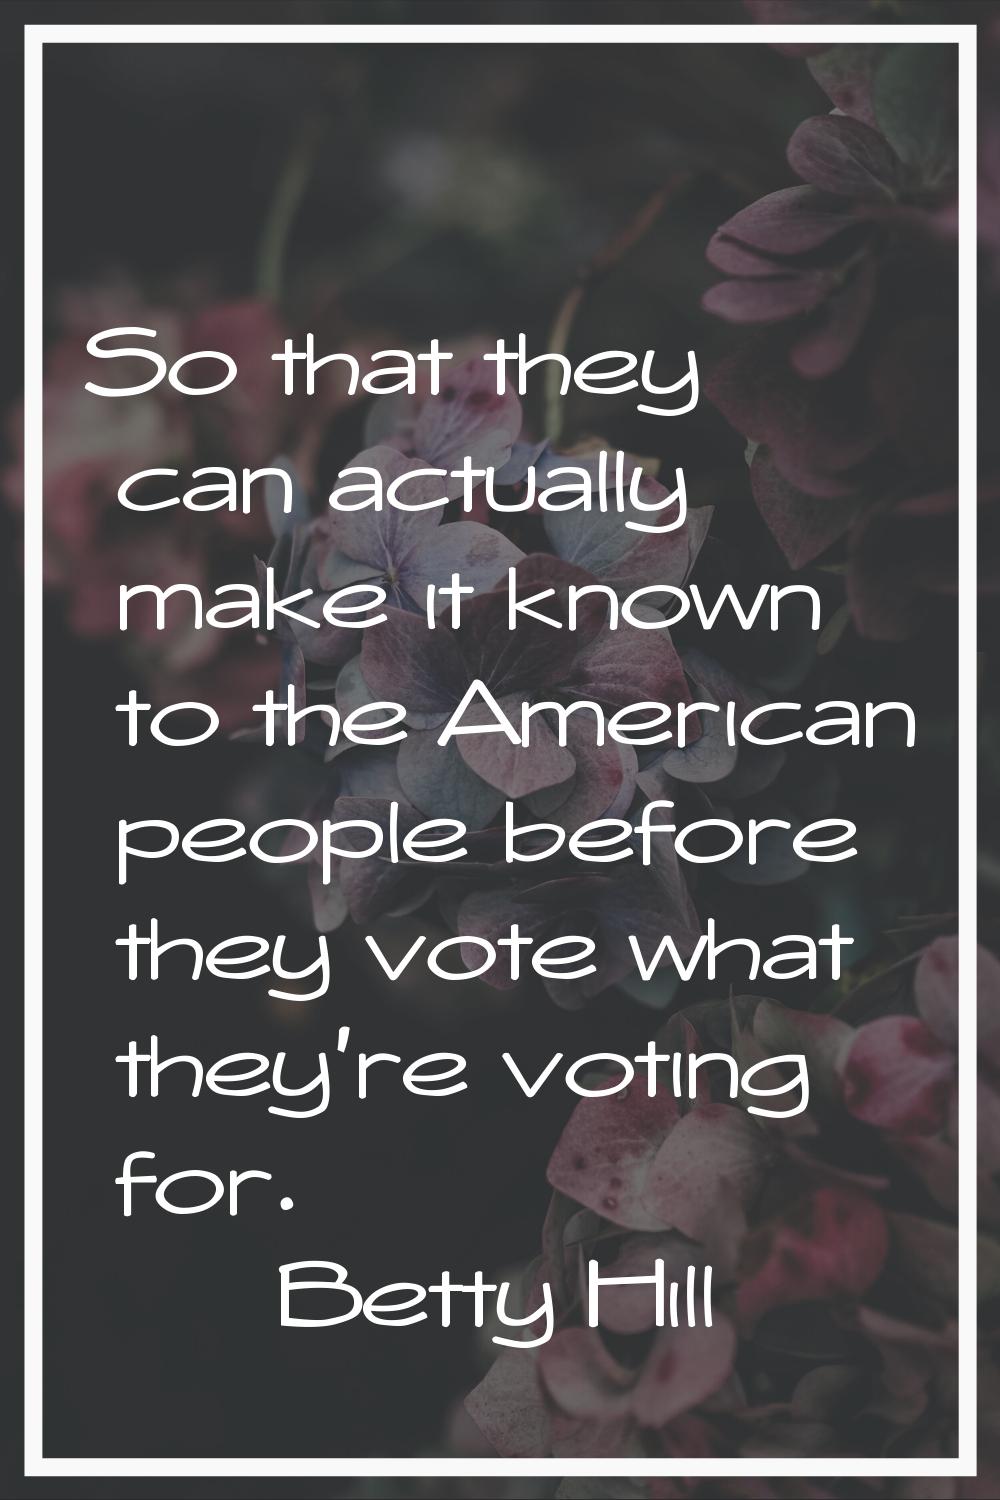 So that they can actually make it known to the American people before they vote what they're voting